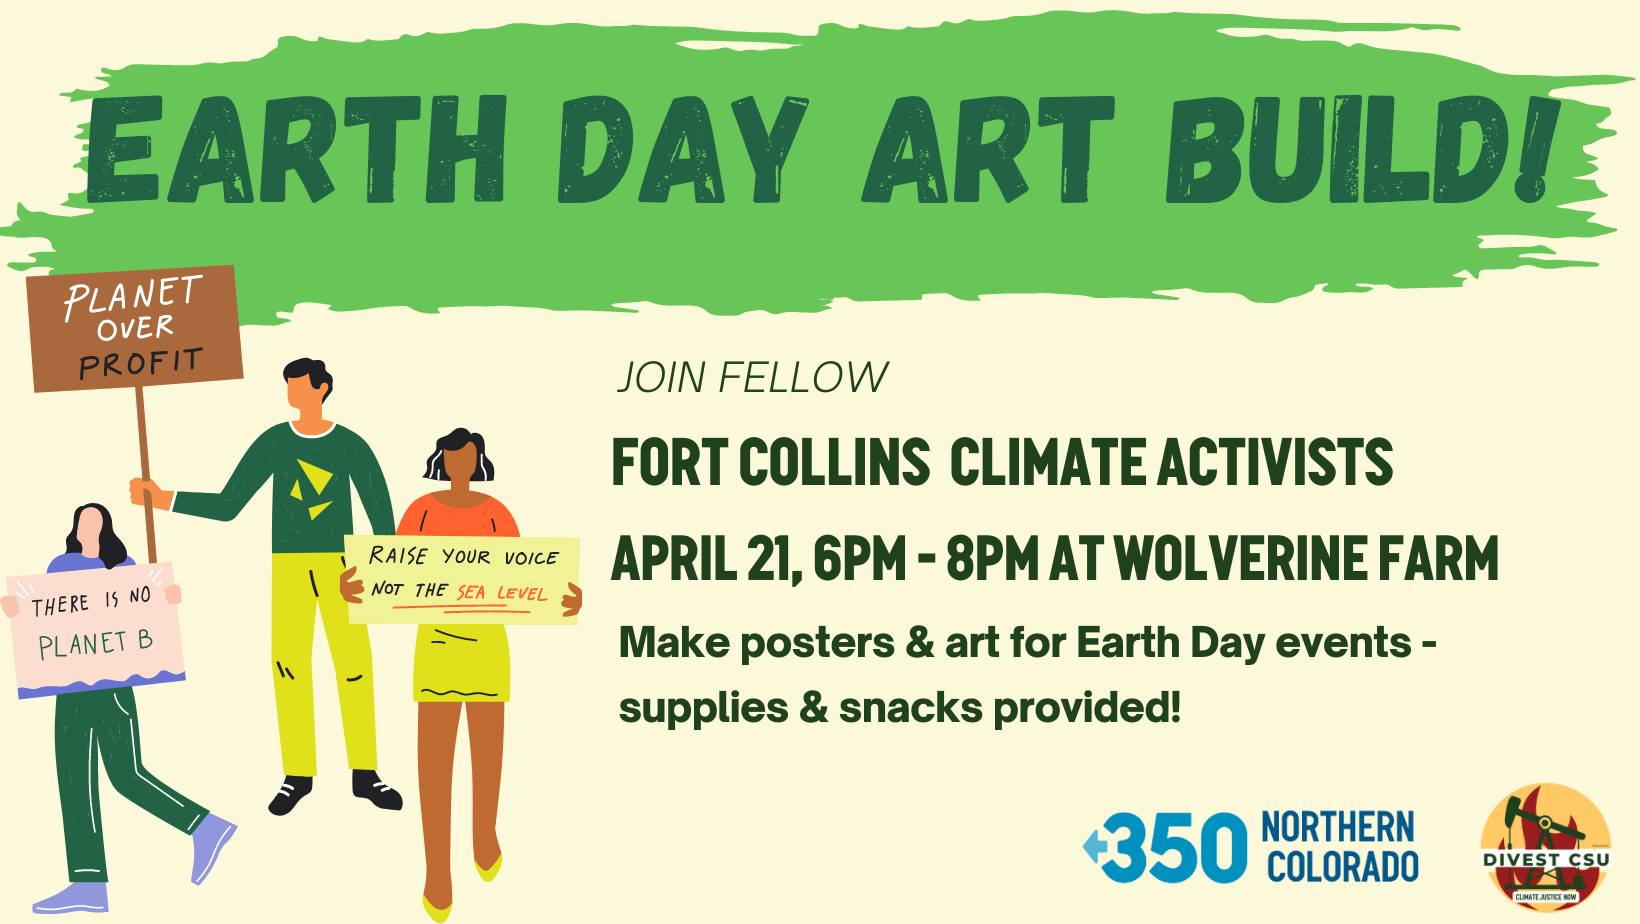 Earth day art build. Join fellow Fort Collins climate activists and make posters and art for Earth day